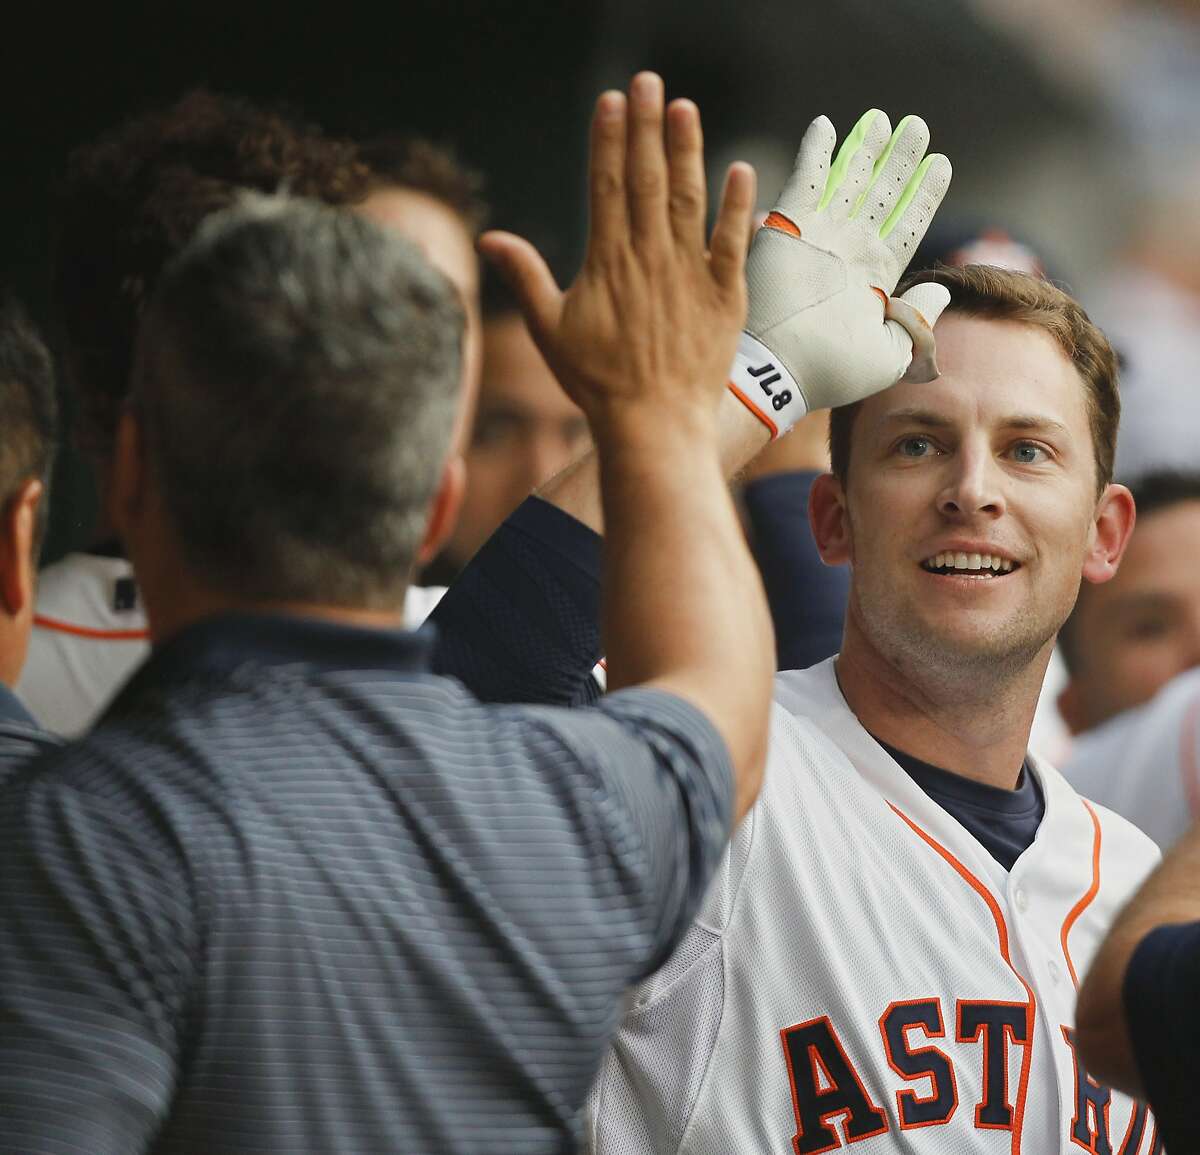 HOUSTON, TX - APRIL 15: Jed Lowrie of the Houston Astros receives congratulations from the dugout after hitting a home run in the first inning against the Oakland Athletics at Minute Maid Park on April 15, 2015 in Houston, Texas. All Major League Baseball players are wearing #42 today in honor of Jackie Robinson Day. (Photo by Bob Levey/Getty Images)